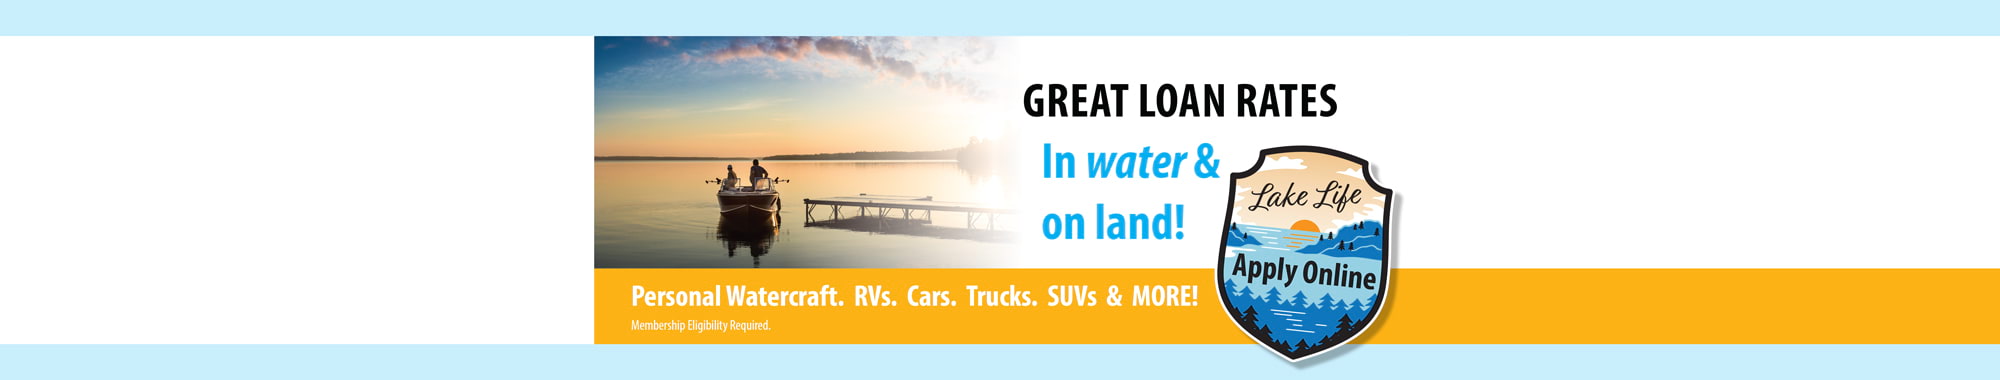 GREAT LOAN RATES - In water & on land! Personal watercraft, RVs, Cars, Trucks, SUVs and MORE! Apply Online.